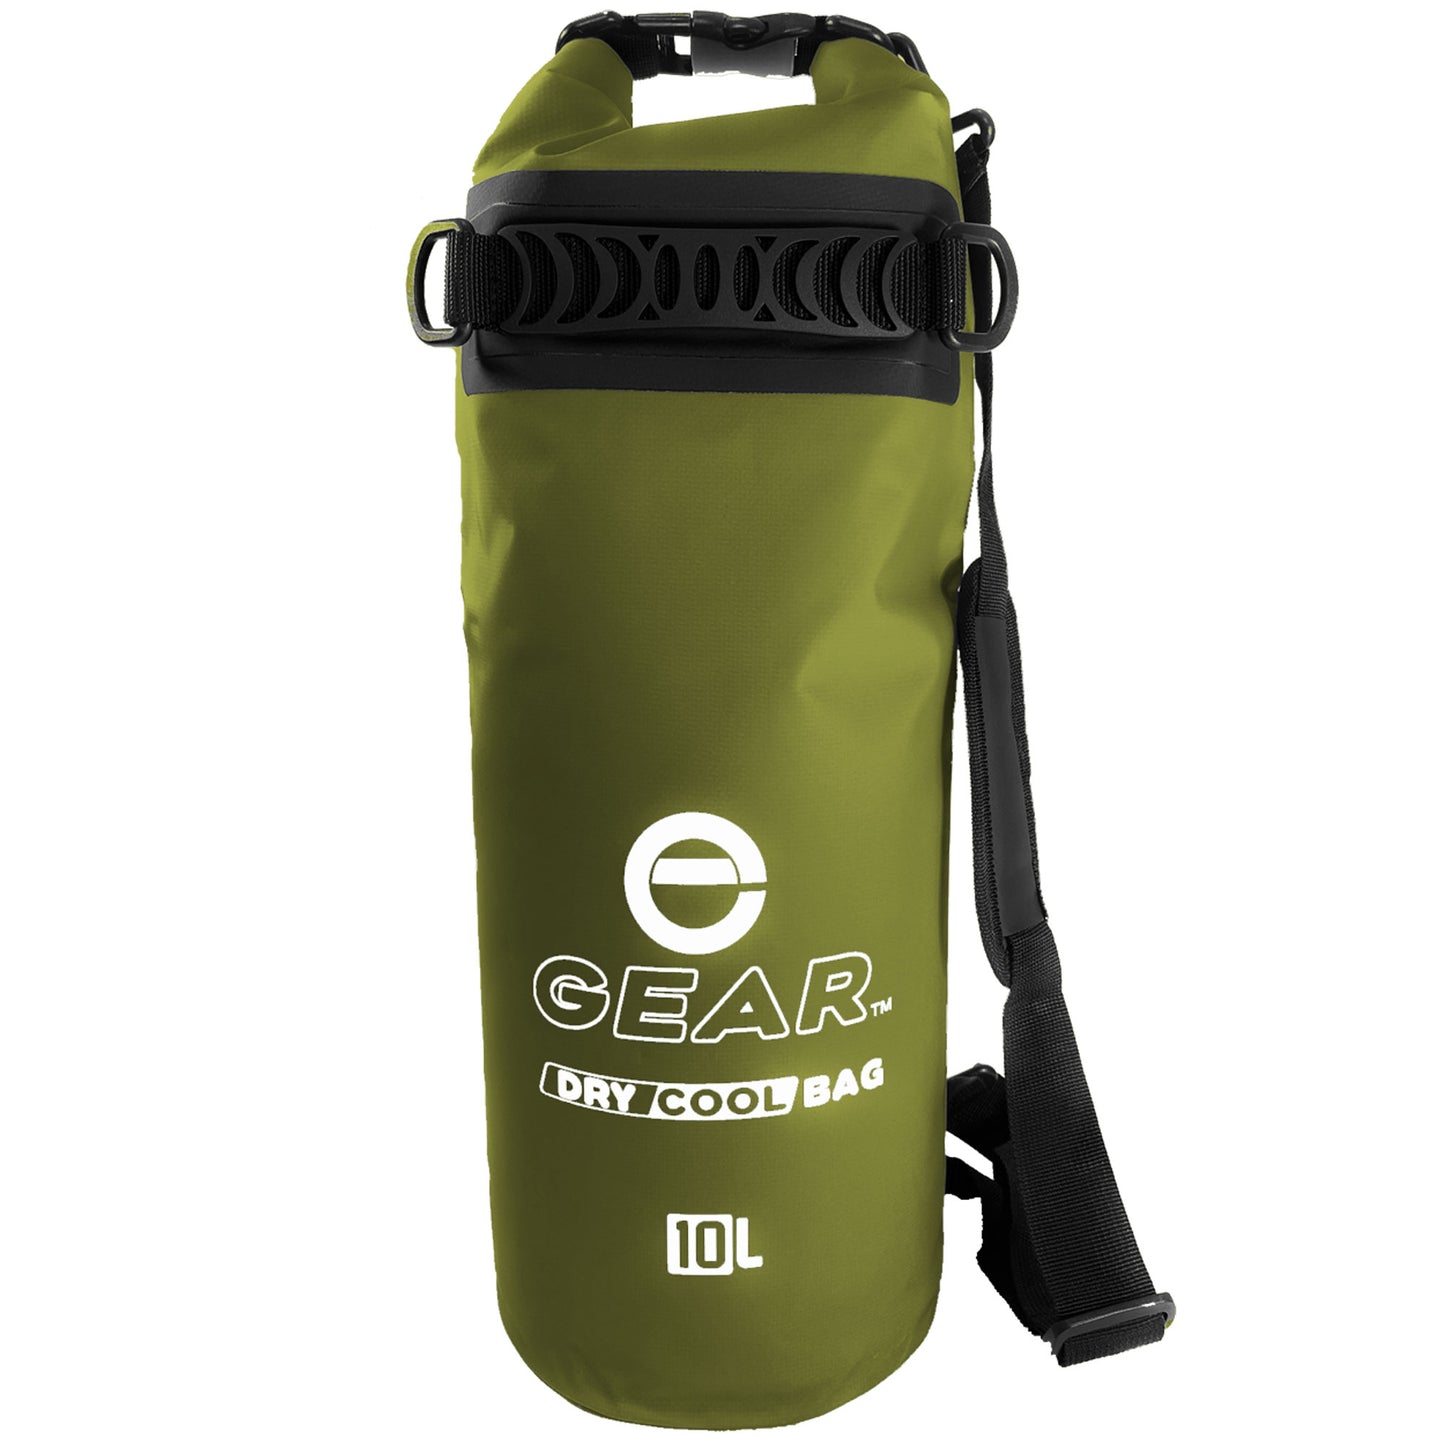 10L - Enthusiast Gear Insulated Dry Bag Floating Cooler – Roll Top, Leak Proof, Waterproof, Collapsible